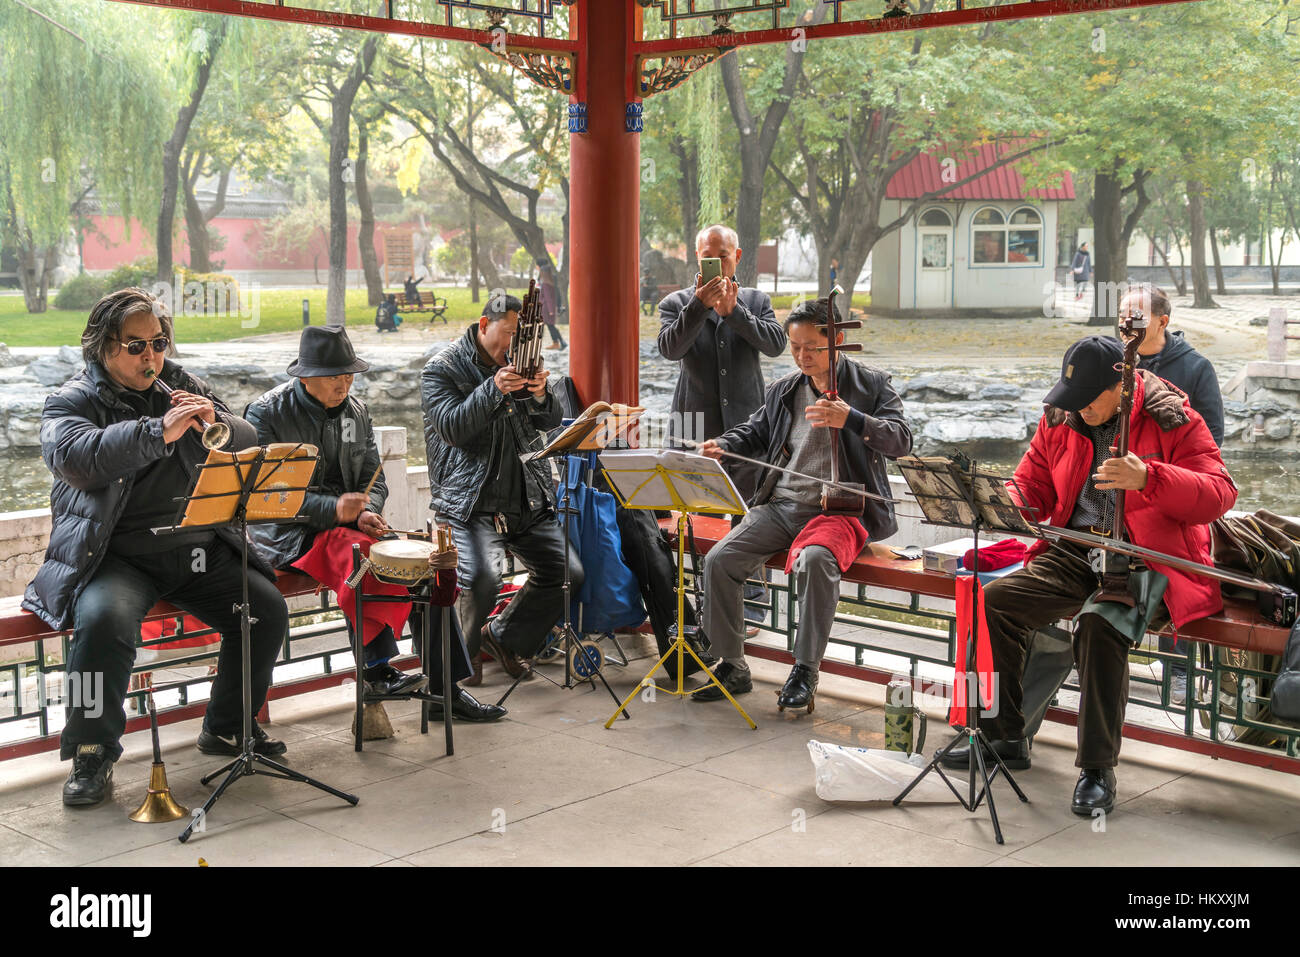 Native musicians with instruments, Ritan Park, Beijing, China Stock Photo